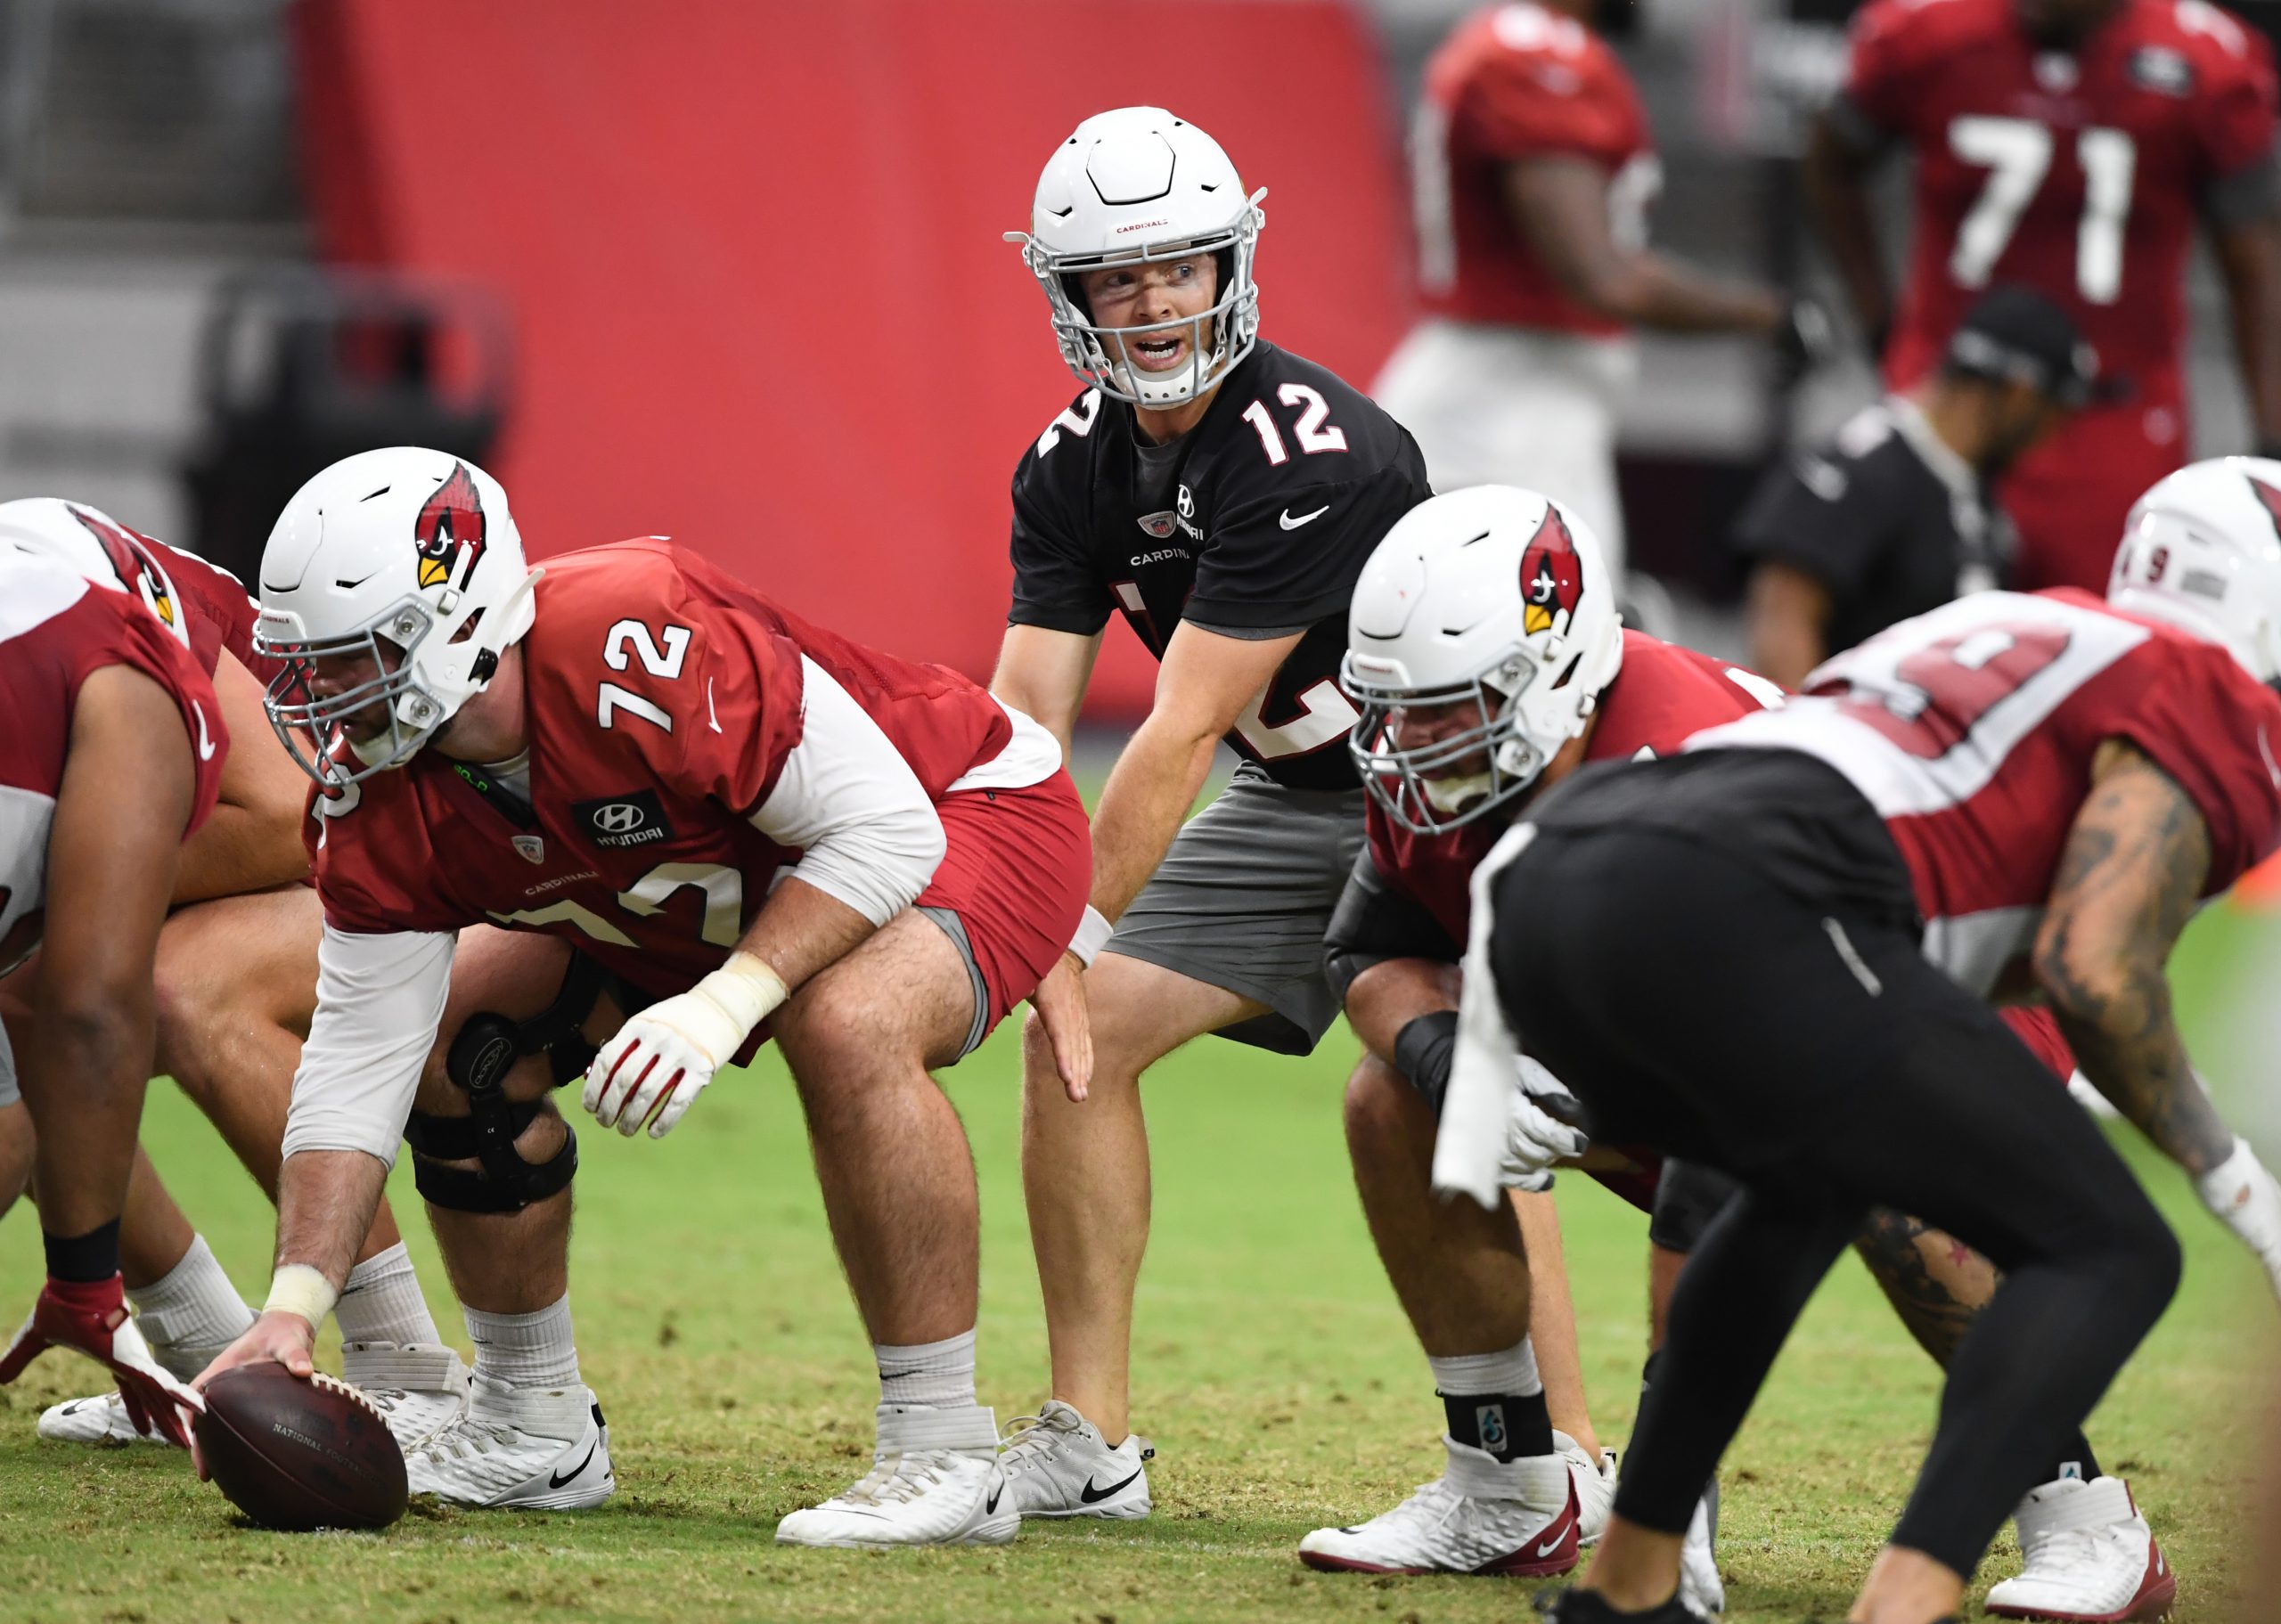 GLENDALE, ARIZONA - JULY 30: Colt McCoy #12 of the Arizona Cardinals participates in drills during ...